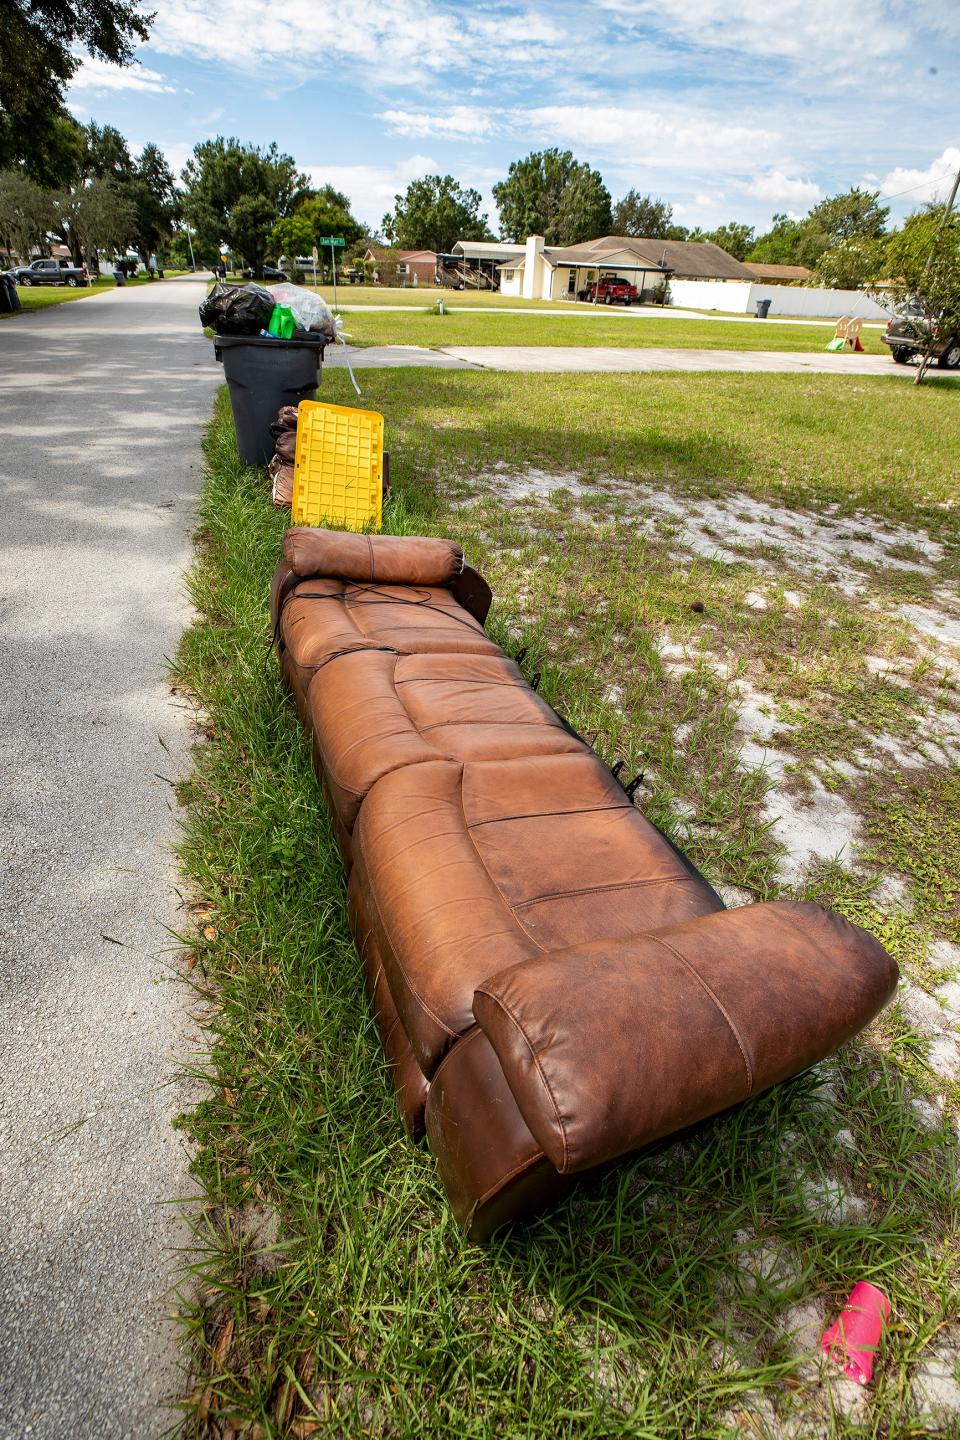 Garbage cans and old furniture can be seen along on Hurst Road in Auburndale.